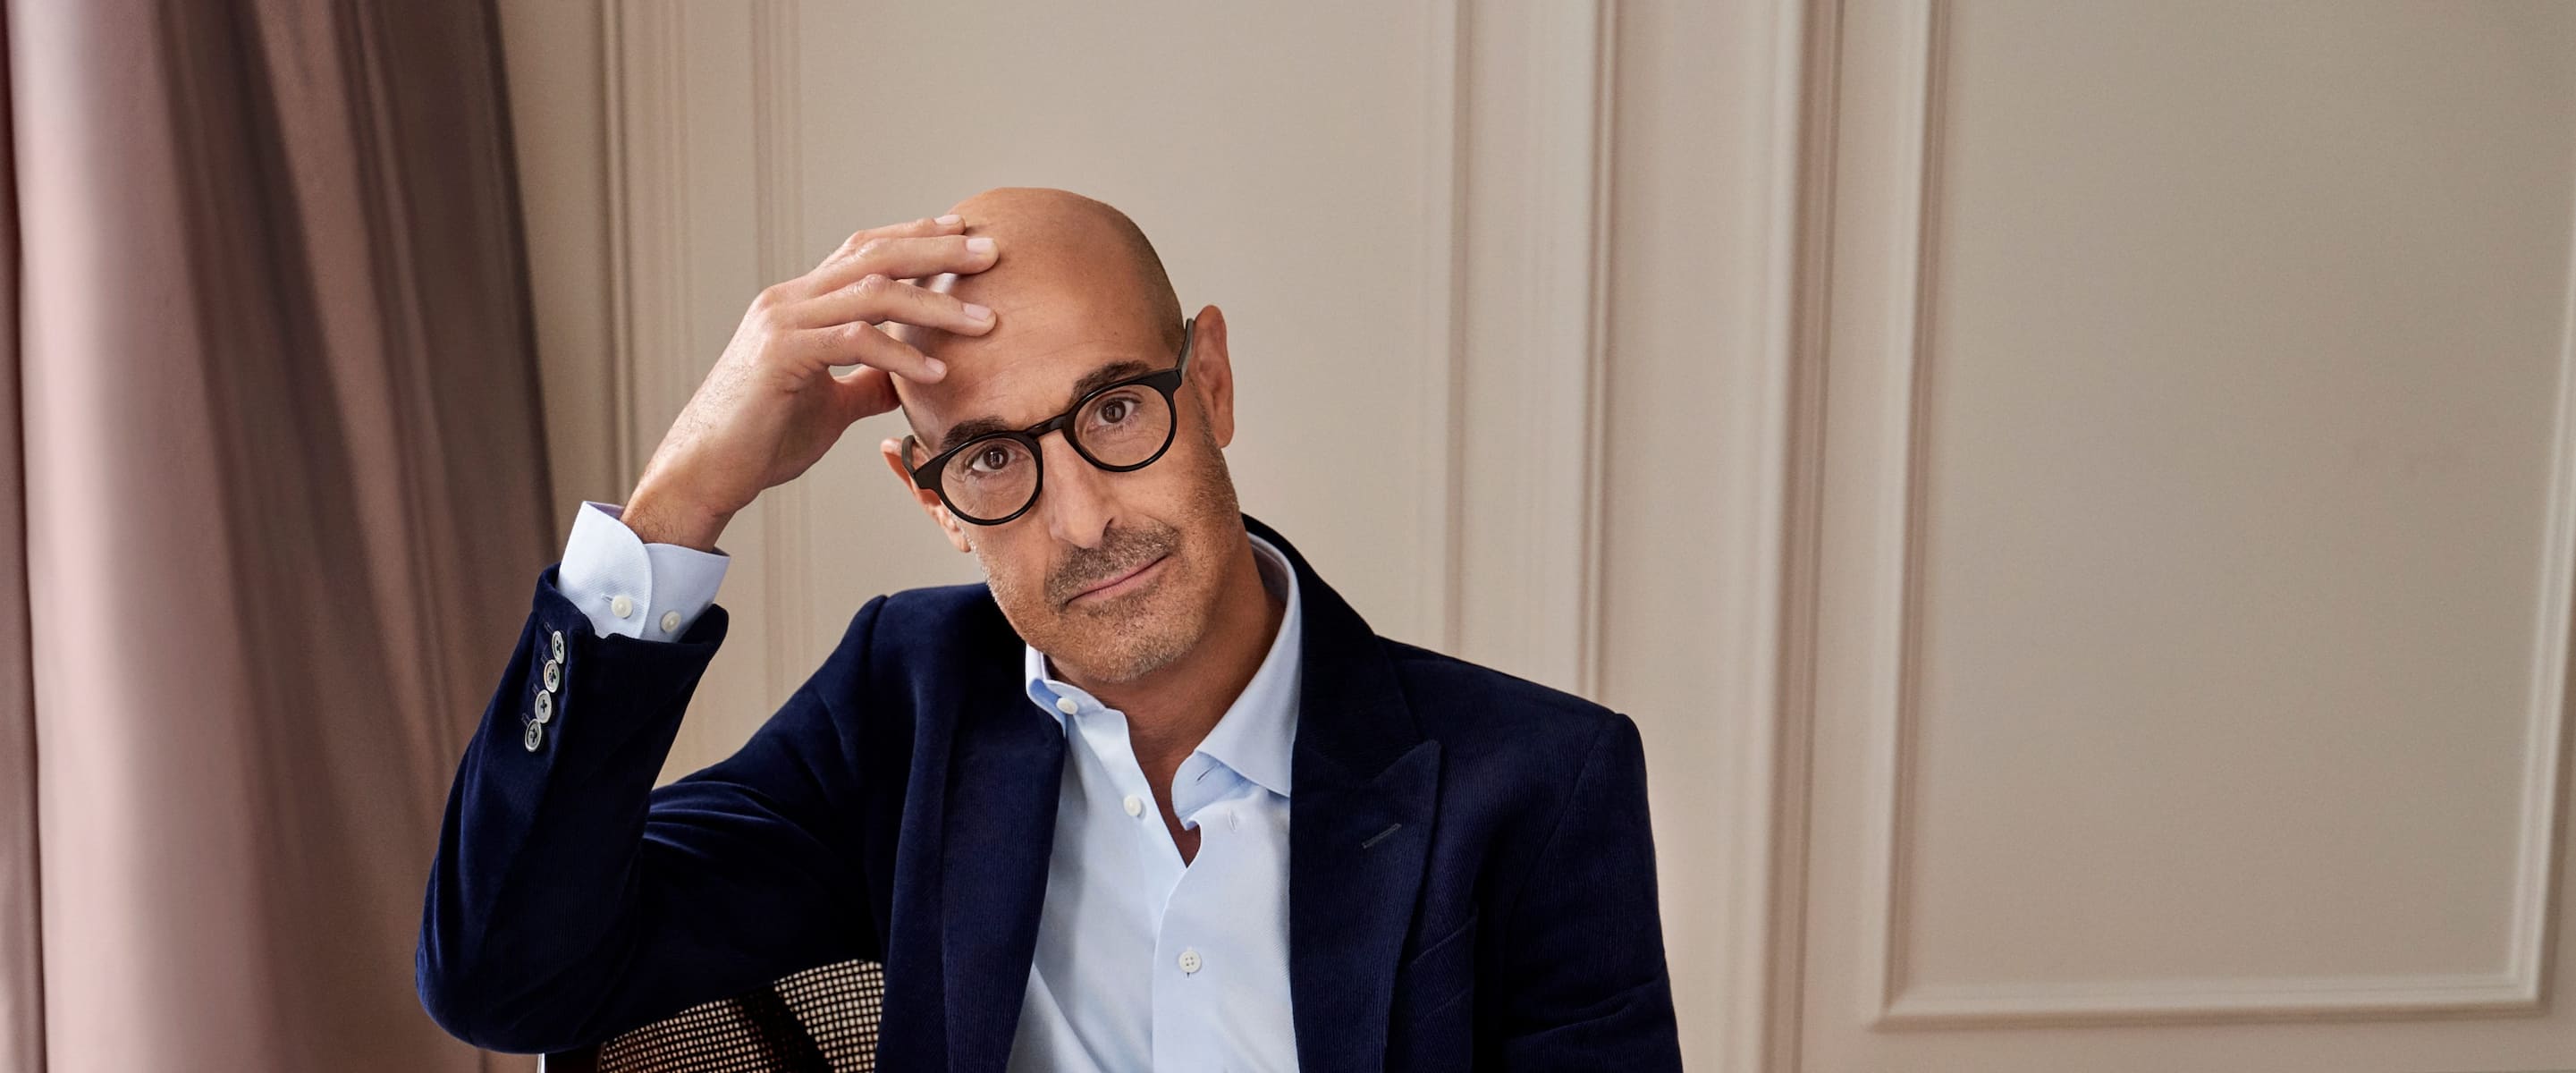 A moment with… Stanley Tucci